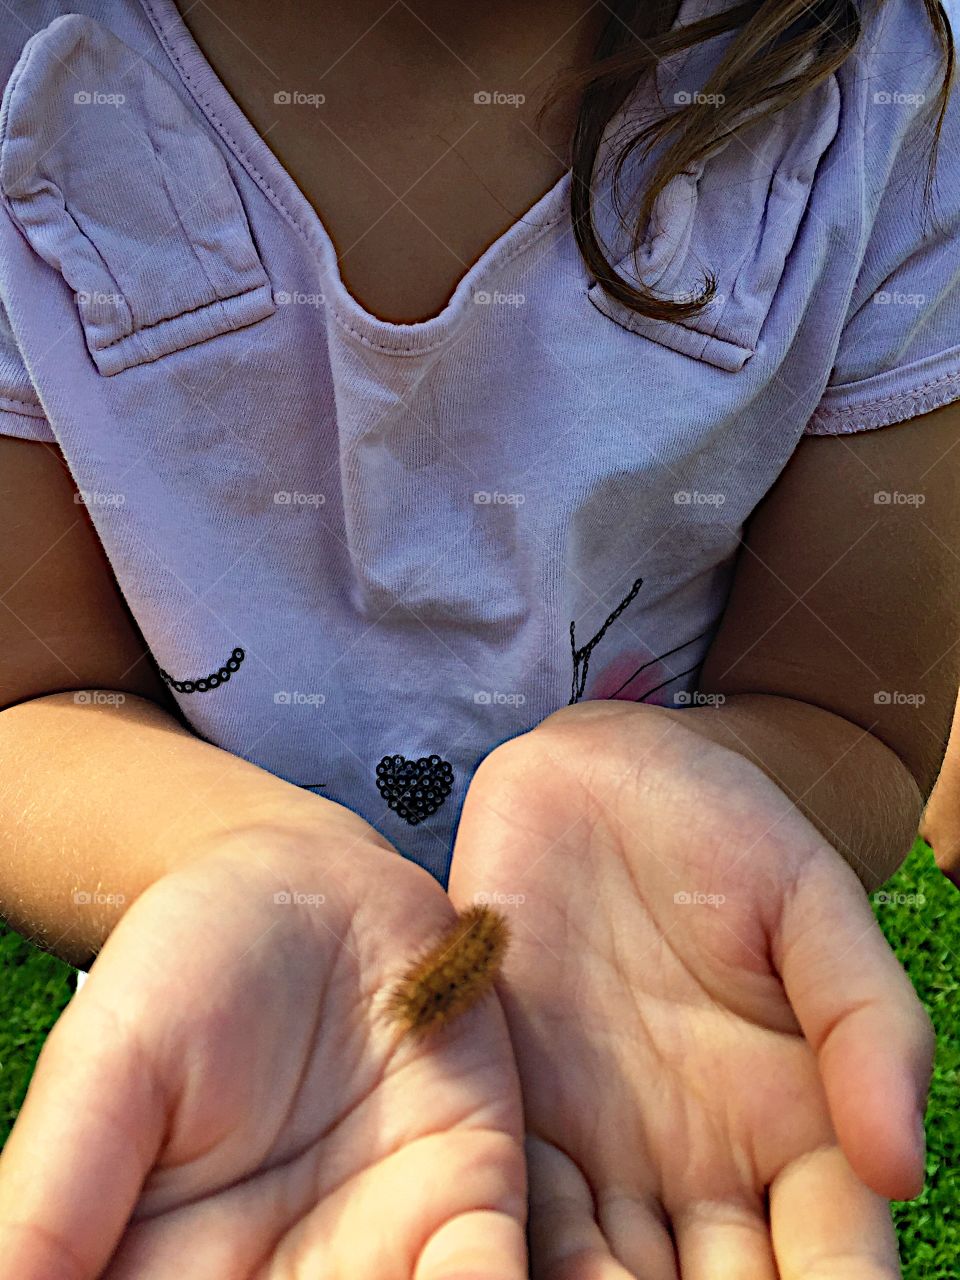 A worm in the girls hand! 